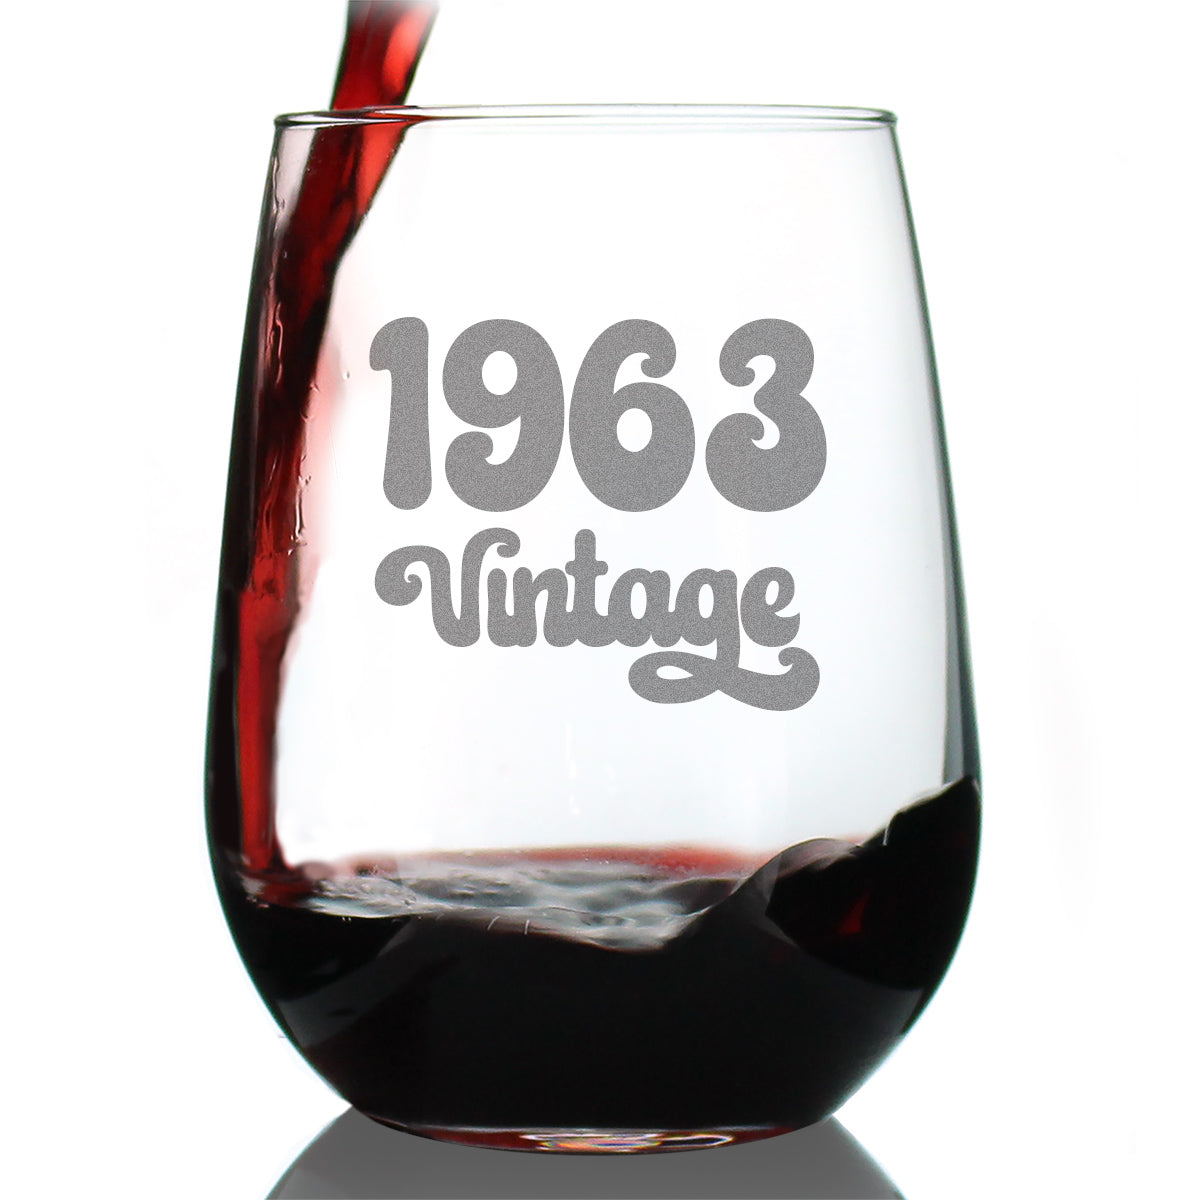 Vintage 1963-60th Birthday Stemless Wine Glass Gifts for Women &amp; Men Turning 60 - Bday Party Decor - Large Glasses